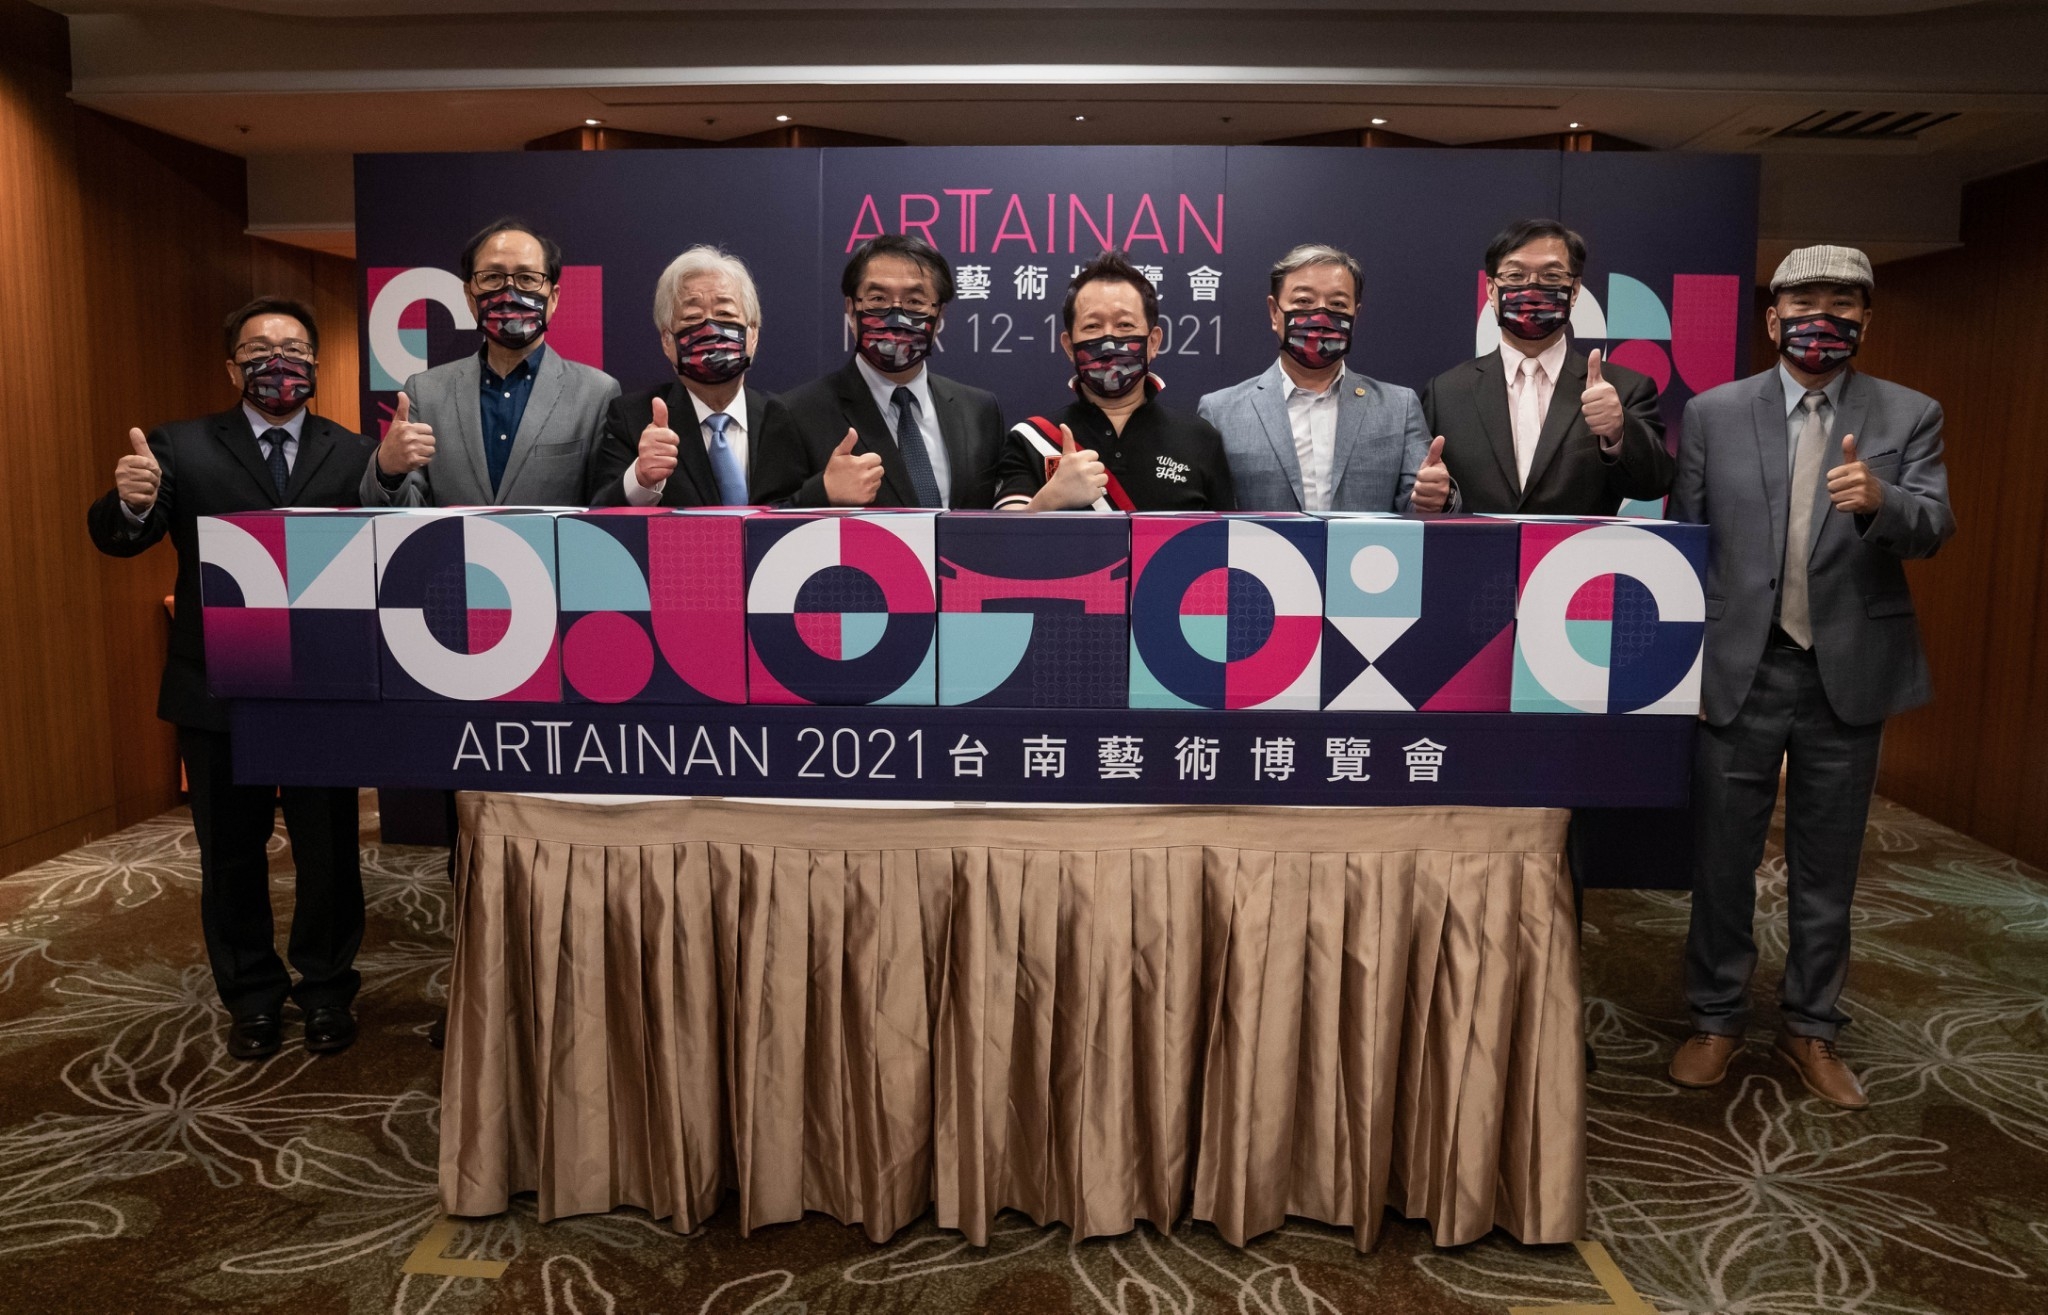 At the ART TAINAN 2021 opening ceremony